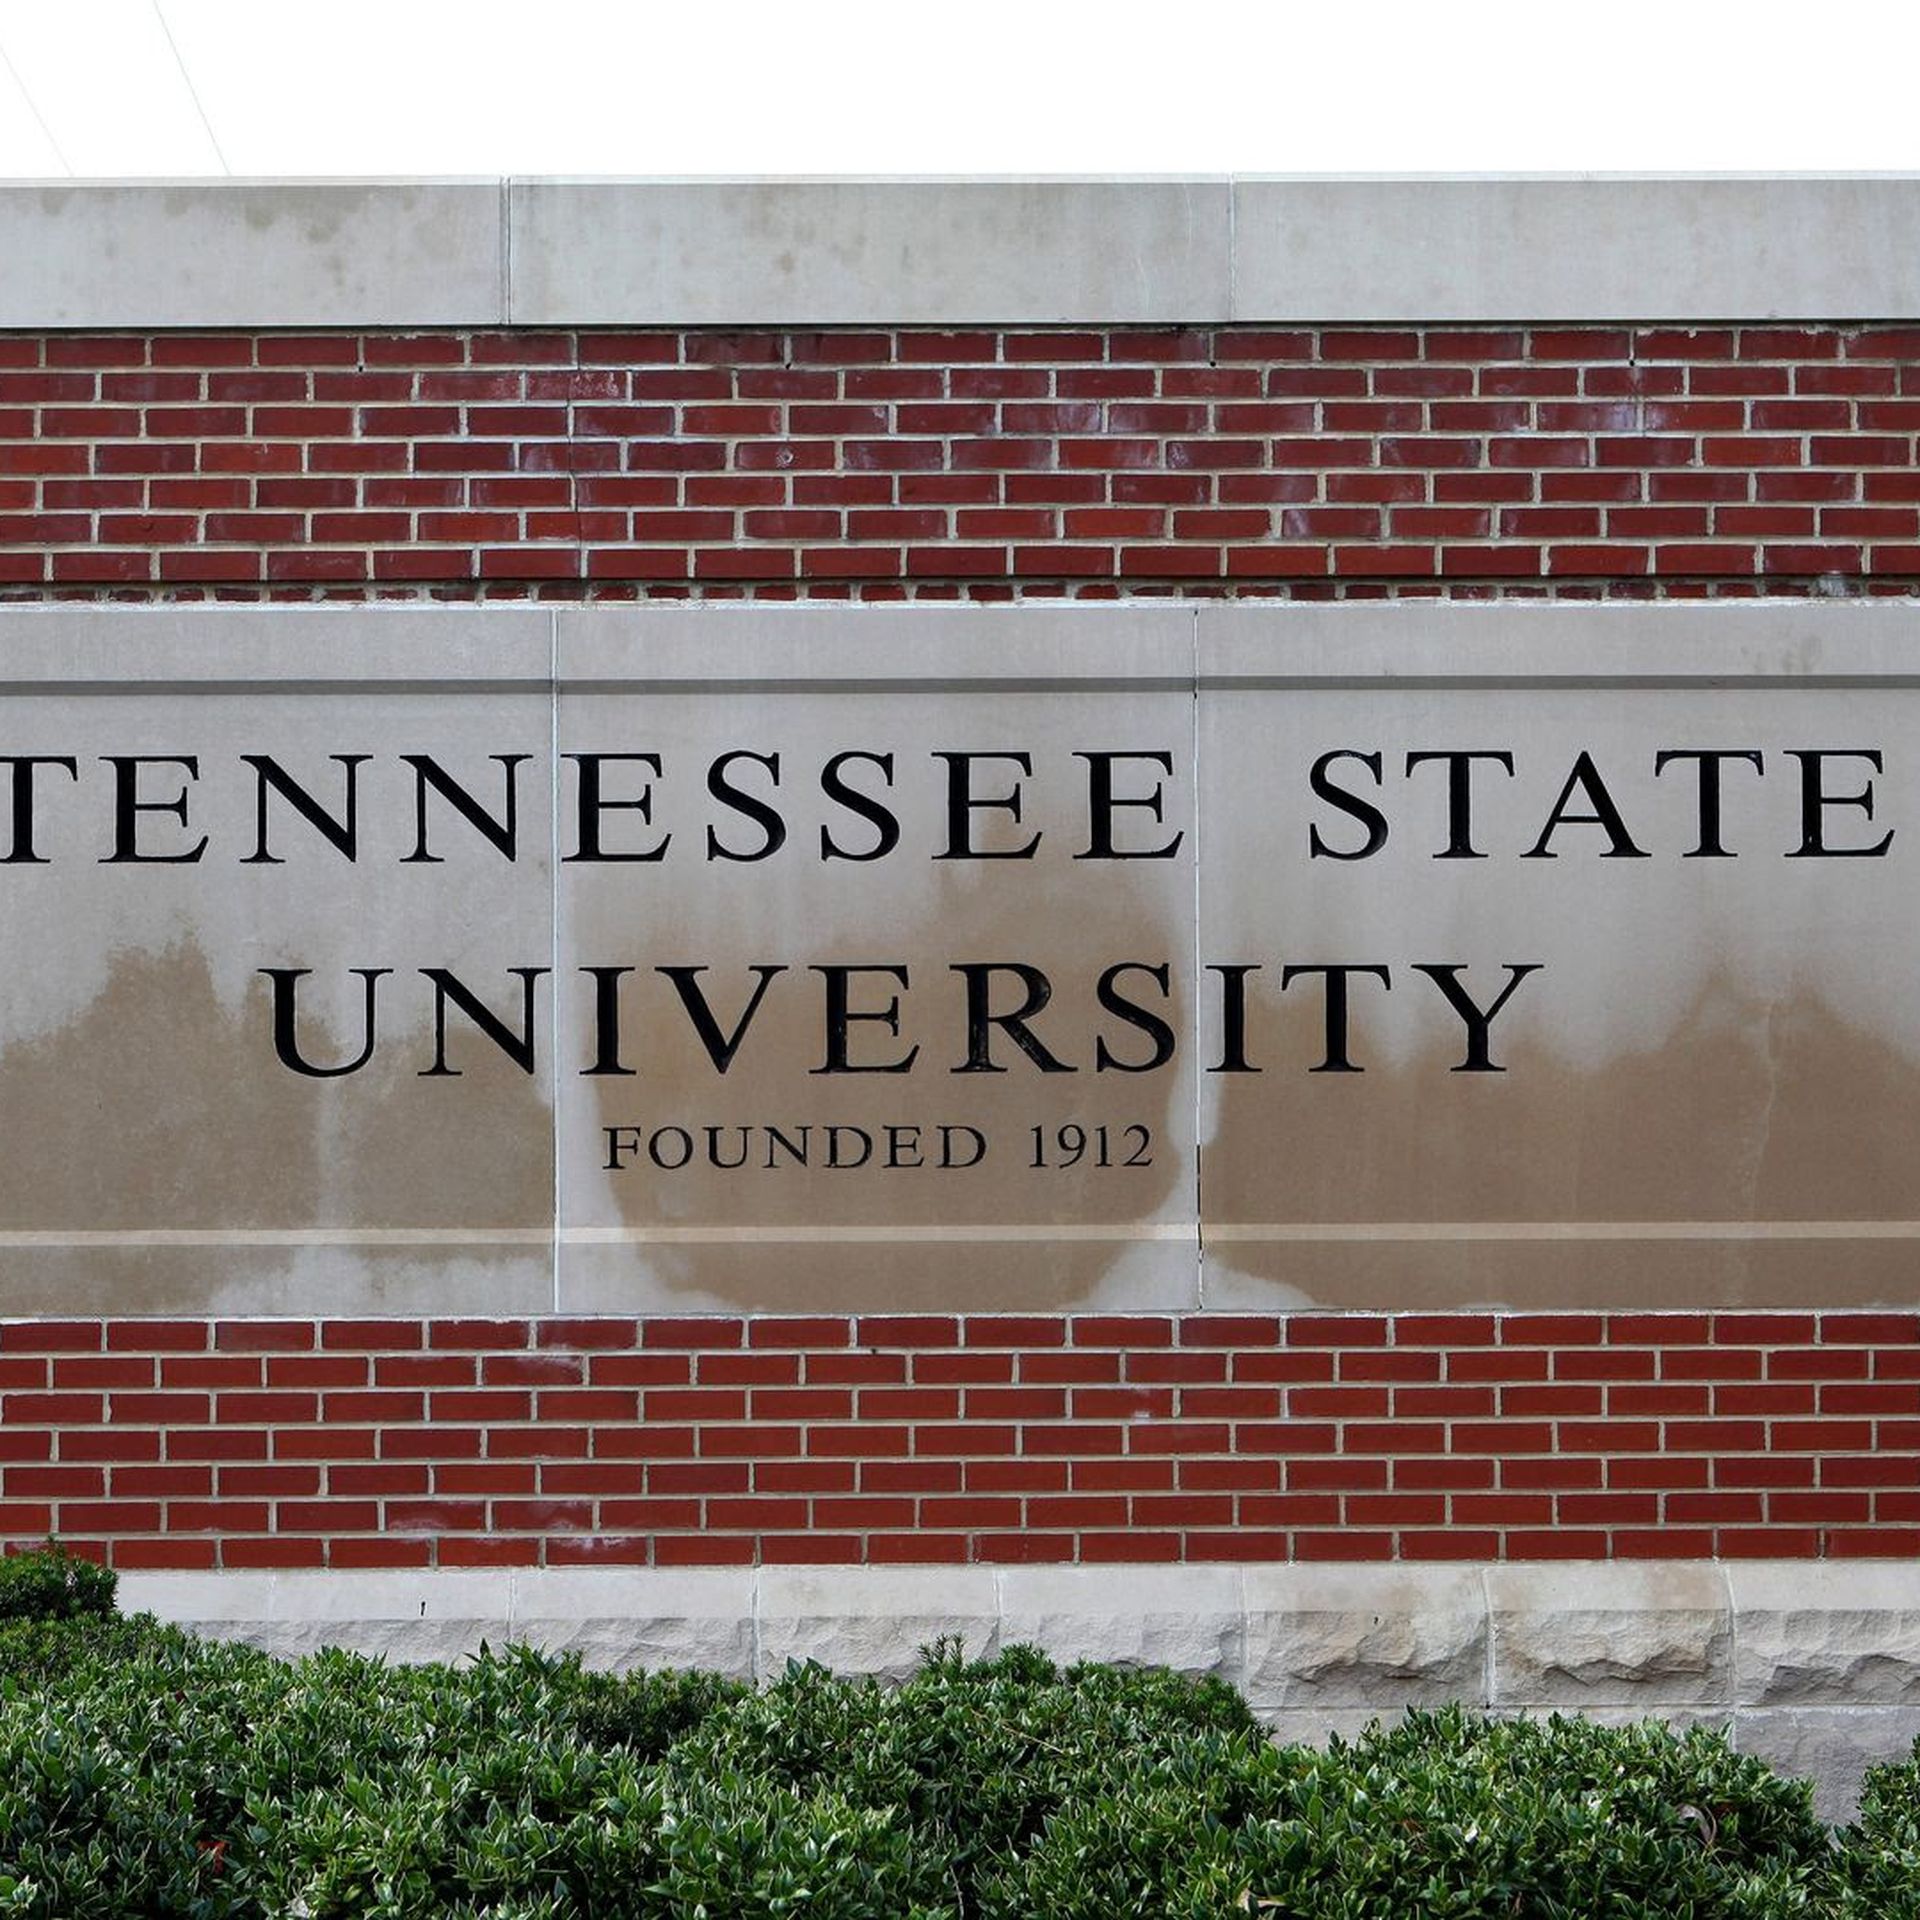 A sign outside Tennessee State University 